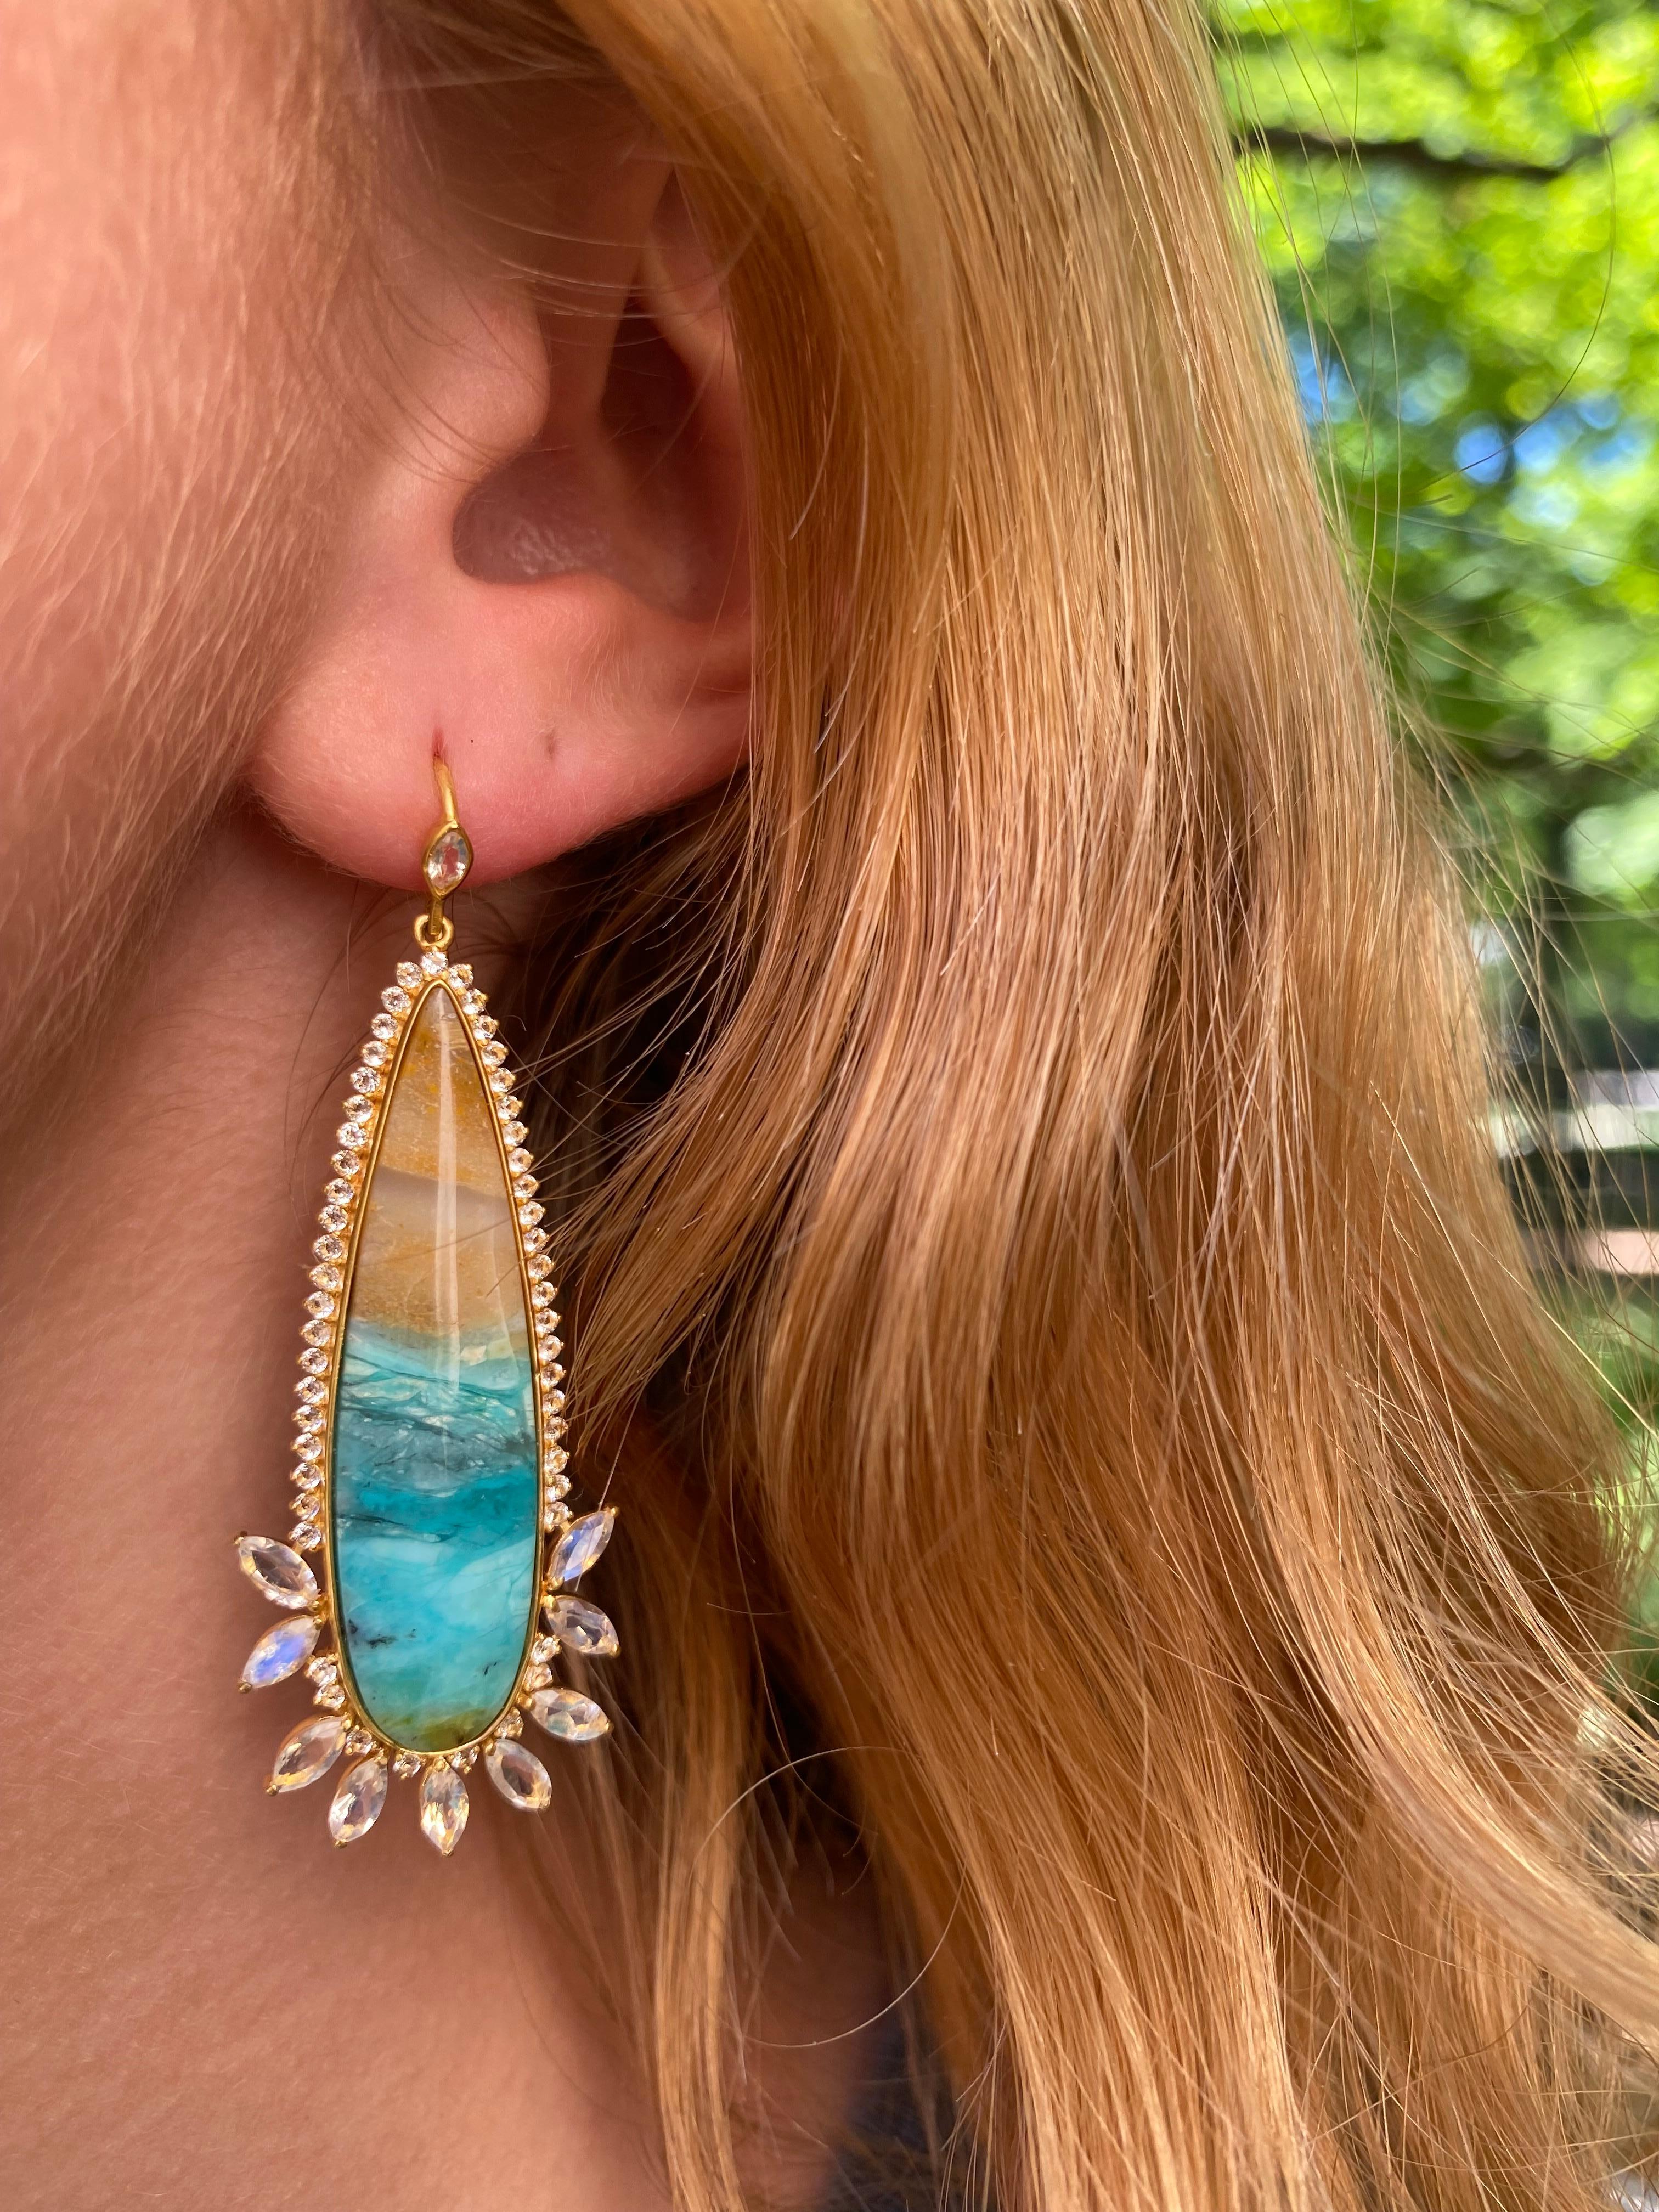 Designed by award winning jewelry designer Lauren Harper, these Rainbow Moonstone, White Sapphire and Petrified Opalized Wood earrings are simply stunning. Set in a warm 18kt matte Gold, these Petrified Wood center stones are like looking at a